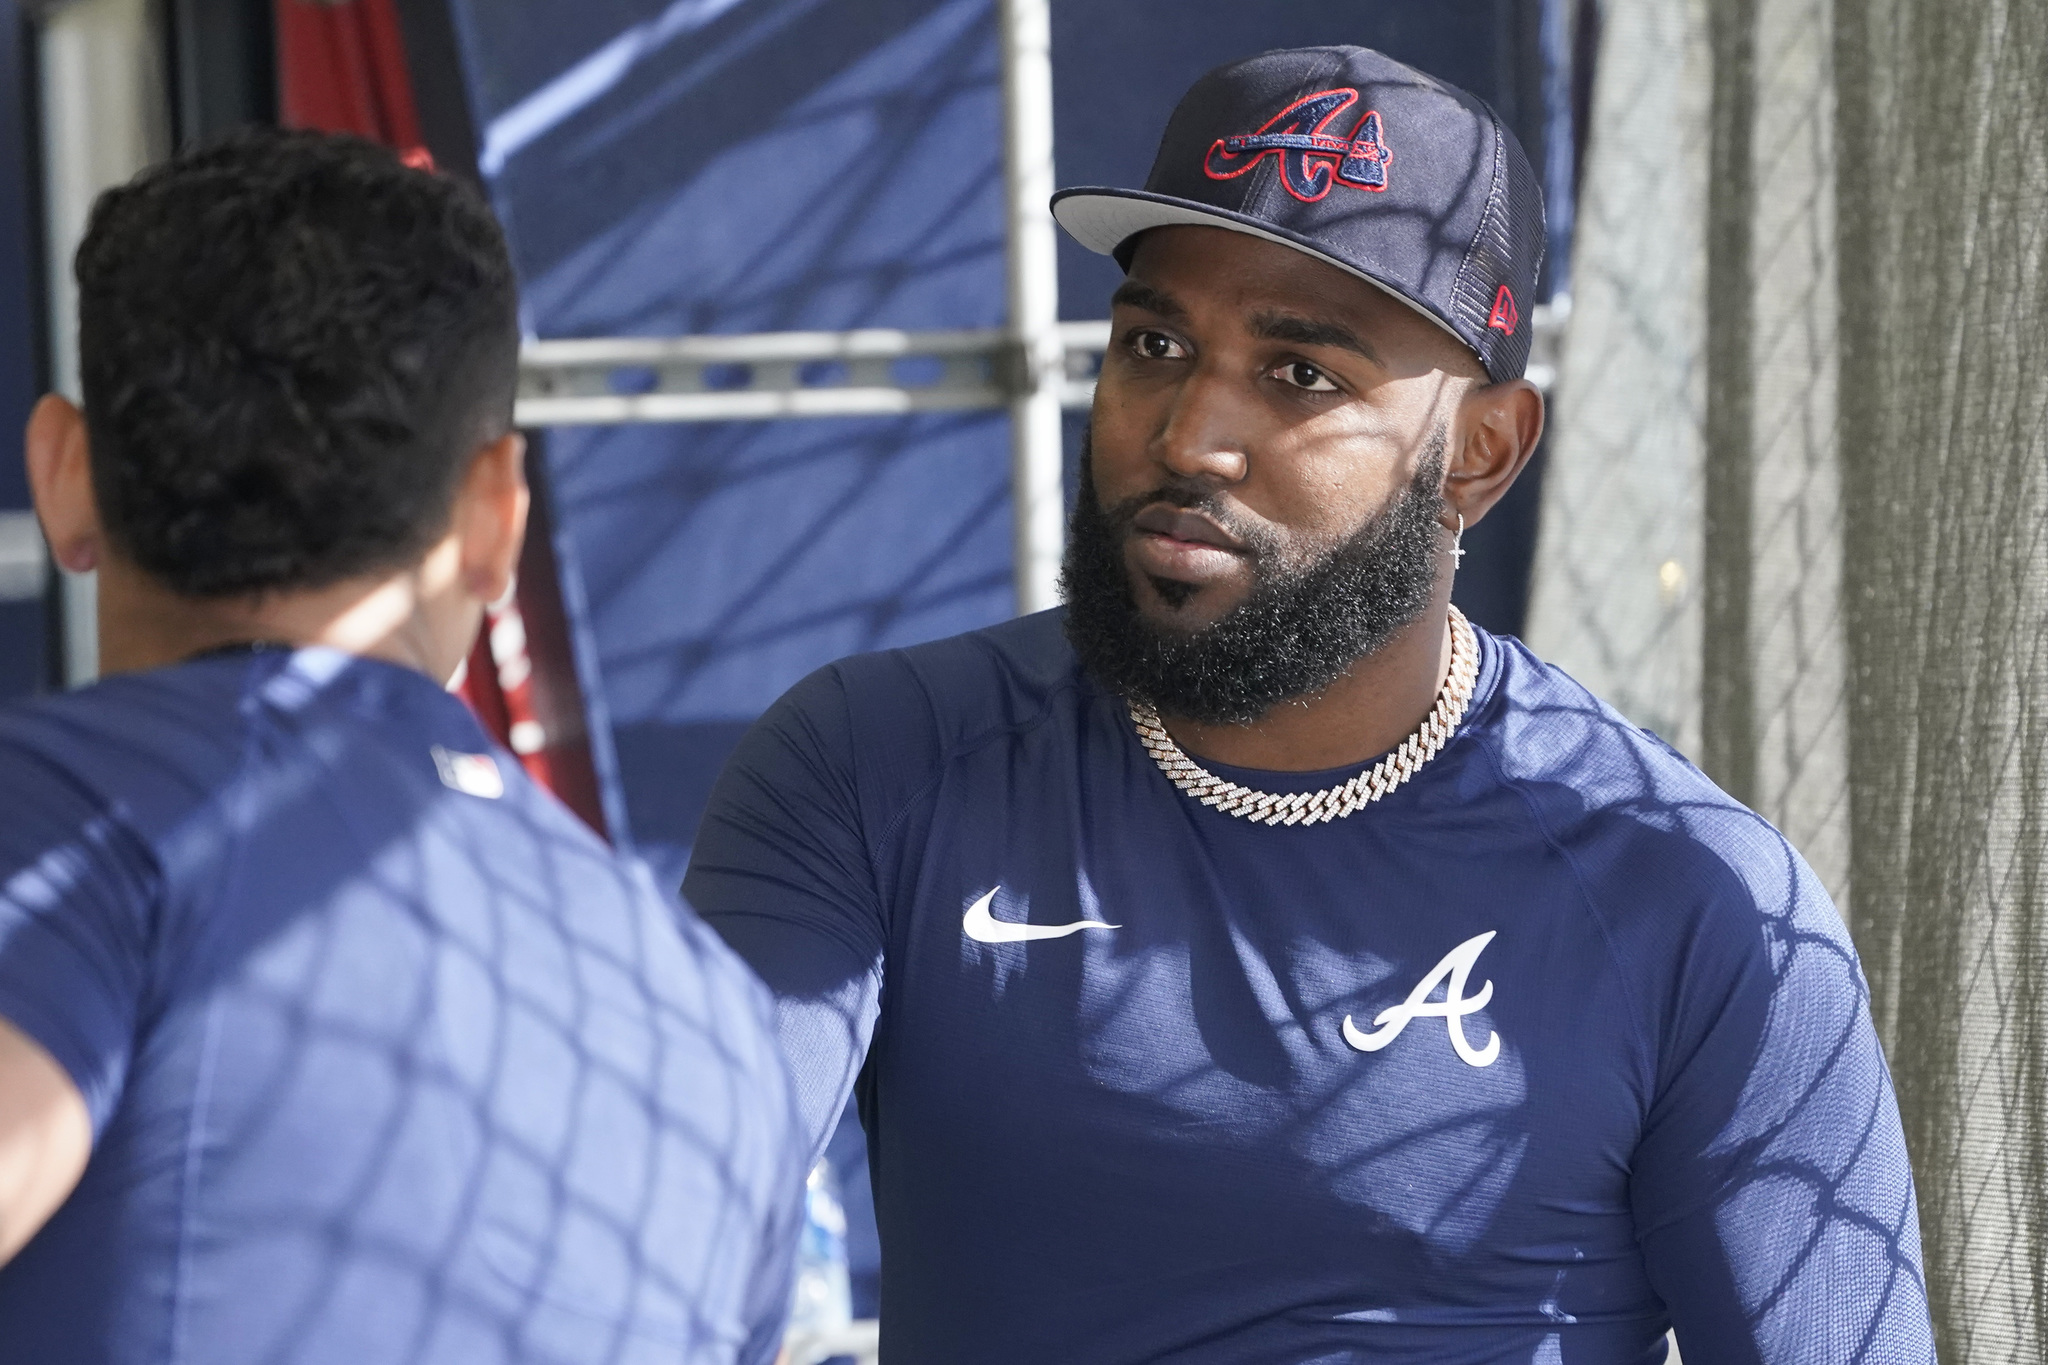 Marcell Ozuna eligible to return at start of 2022 season after